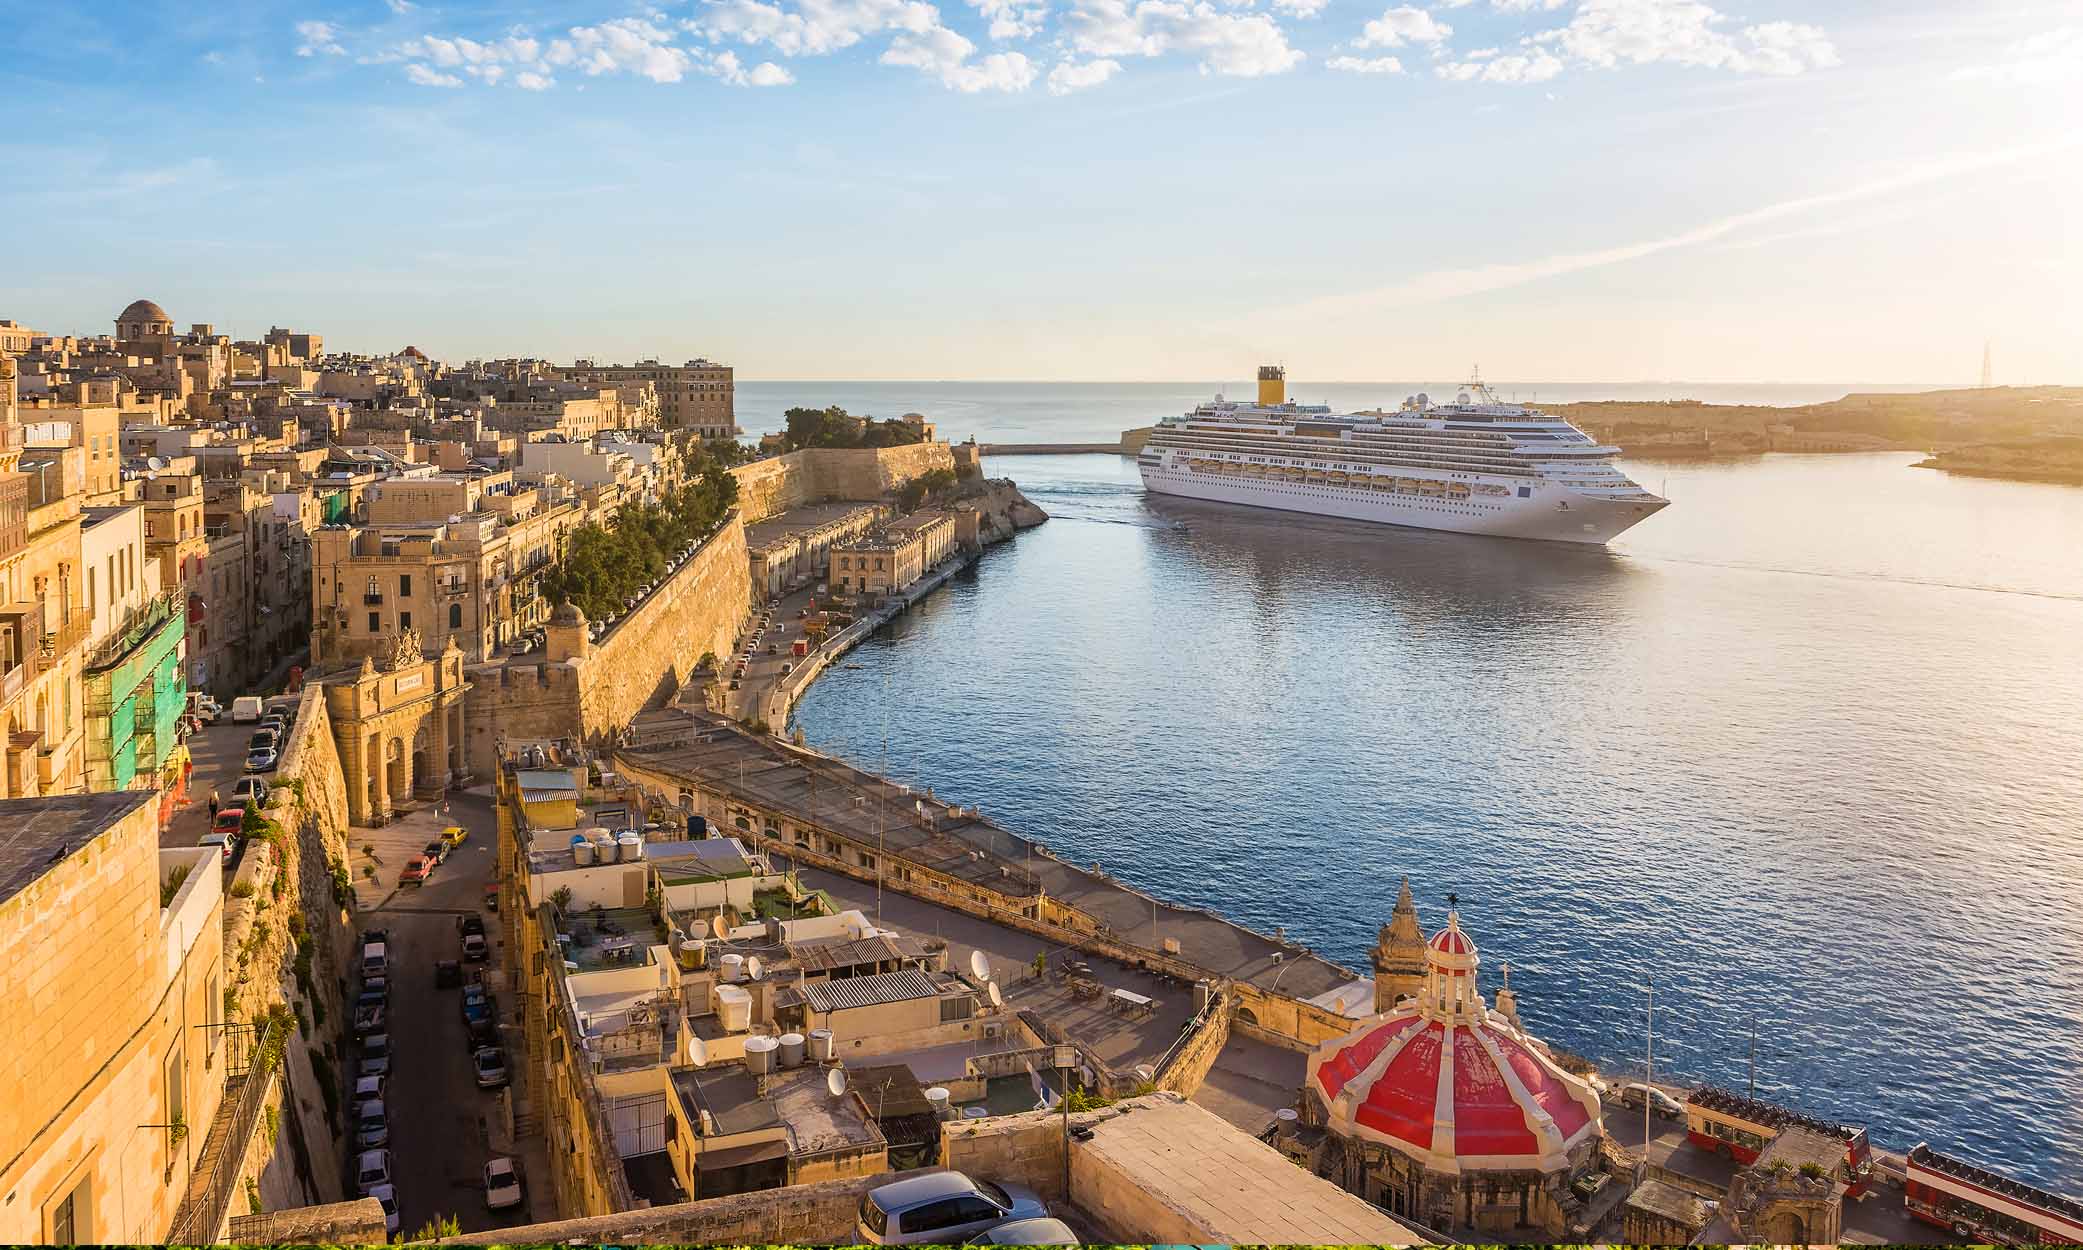 Is Malta worth it if you’re interested in a new citizenship or second residency?